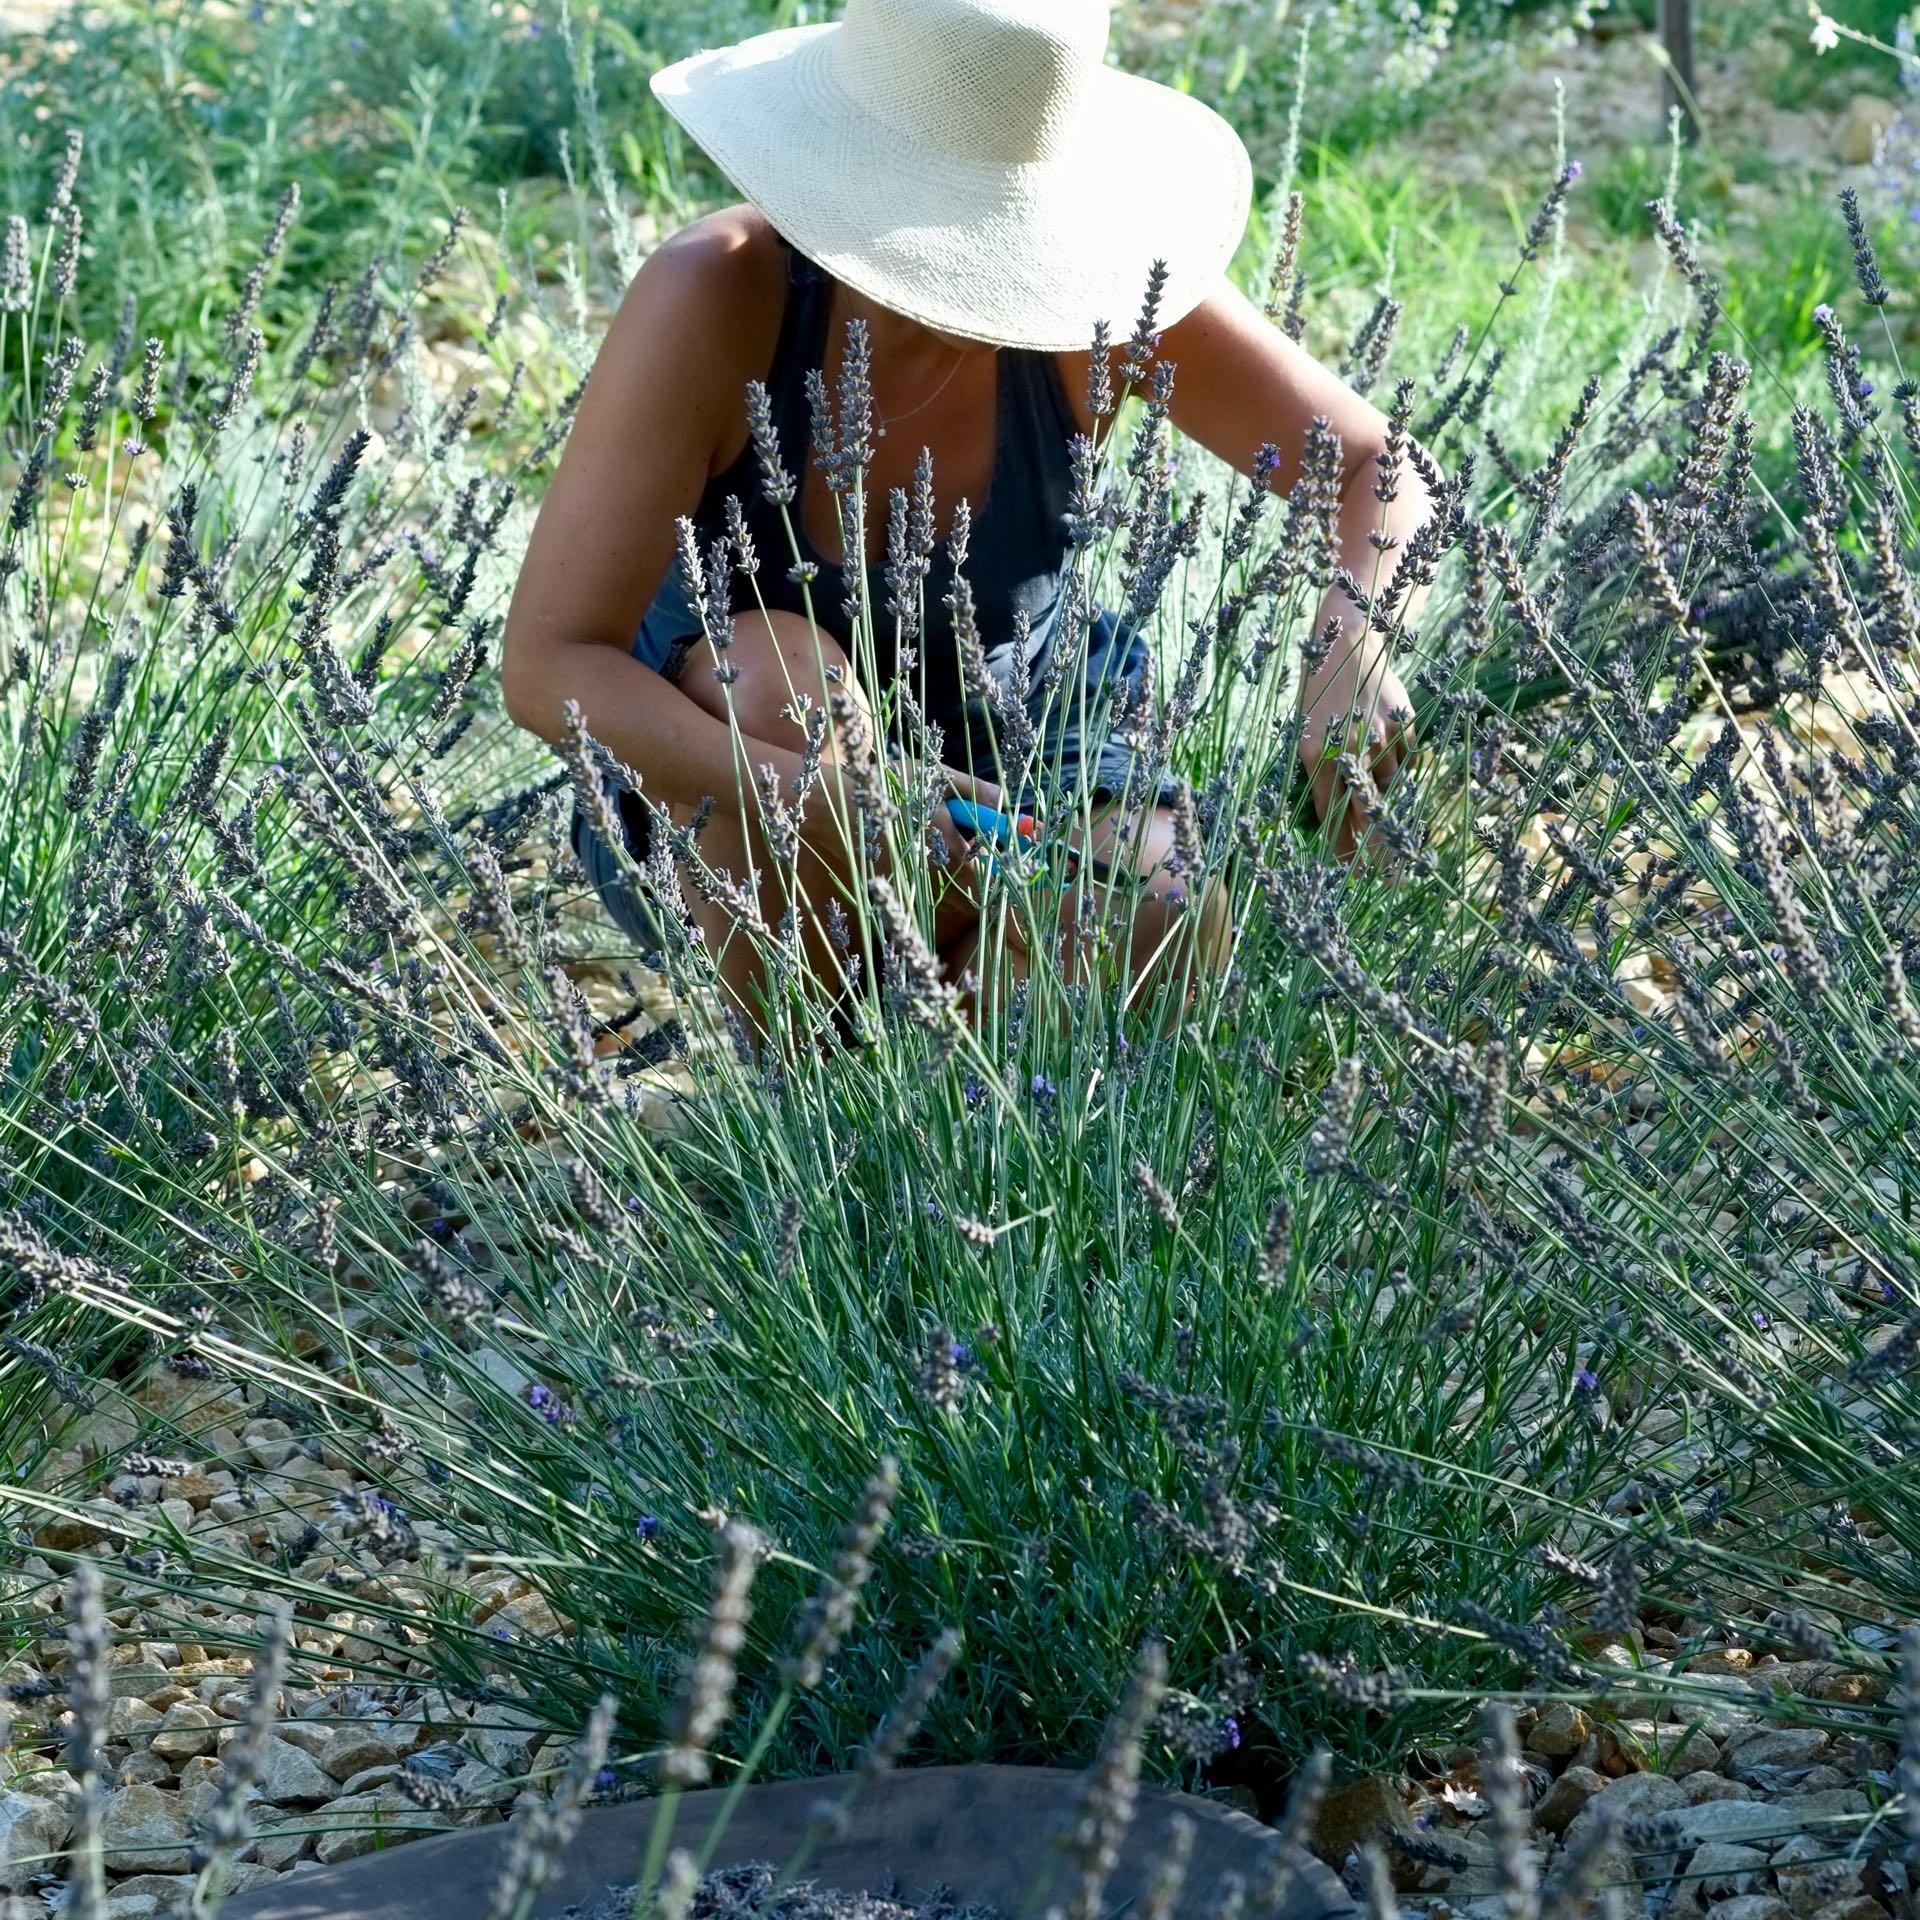 Trimming the lavender